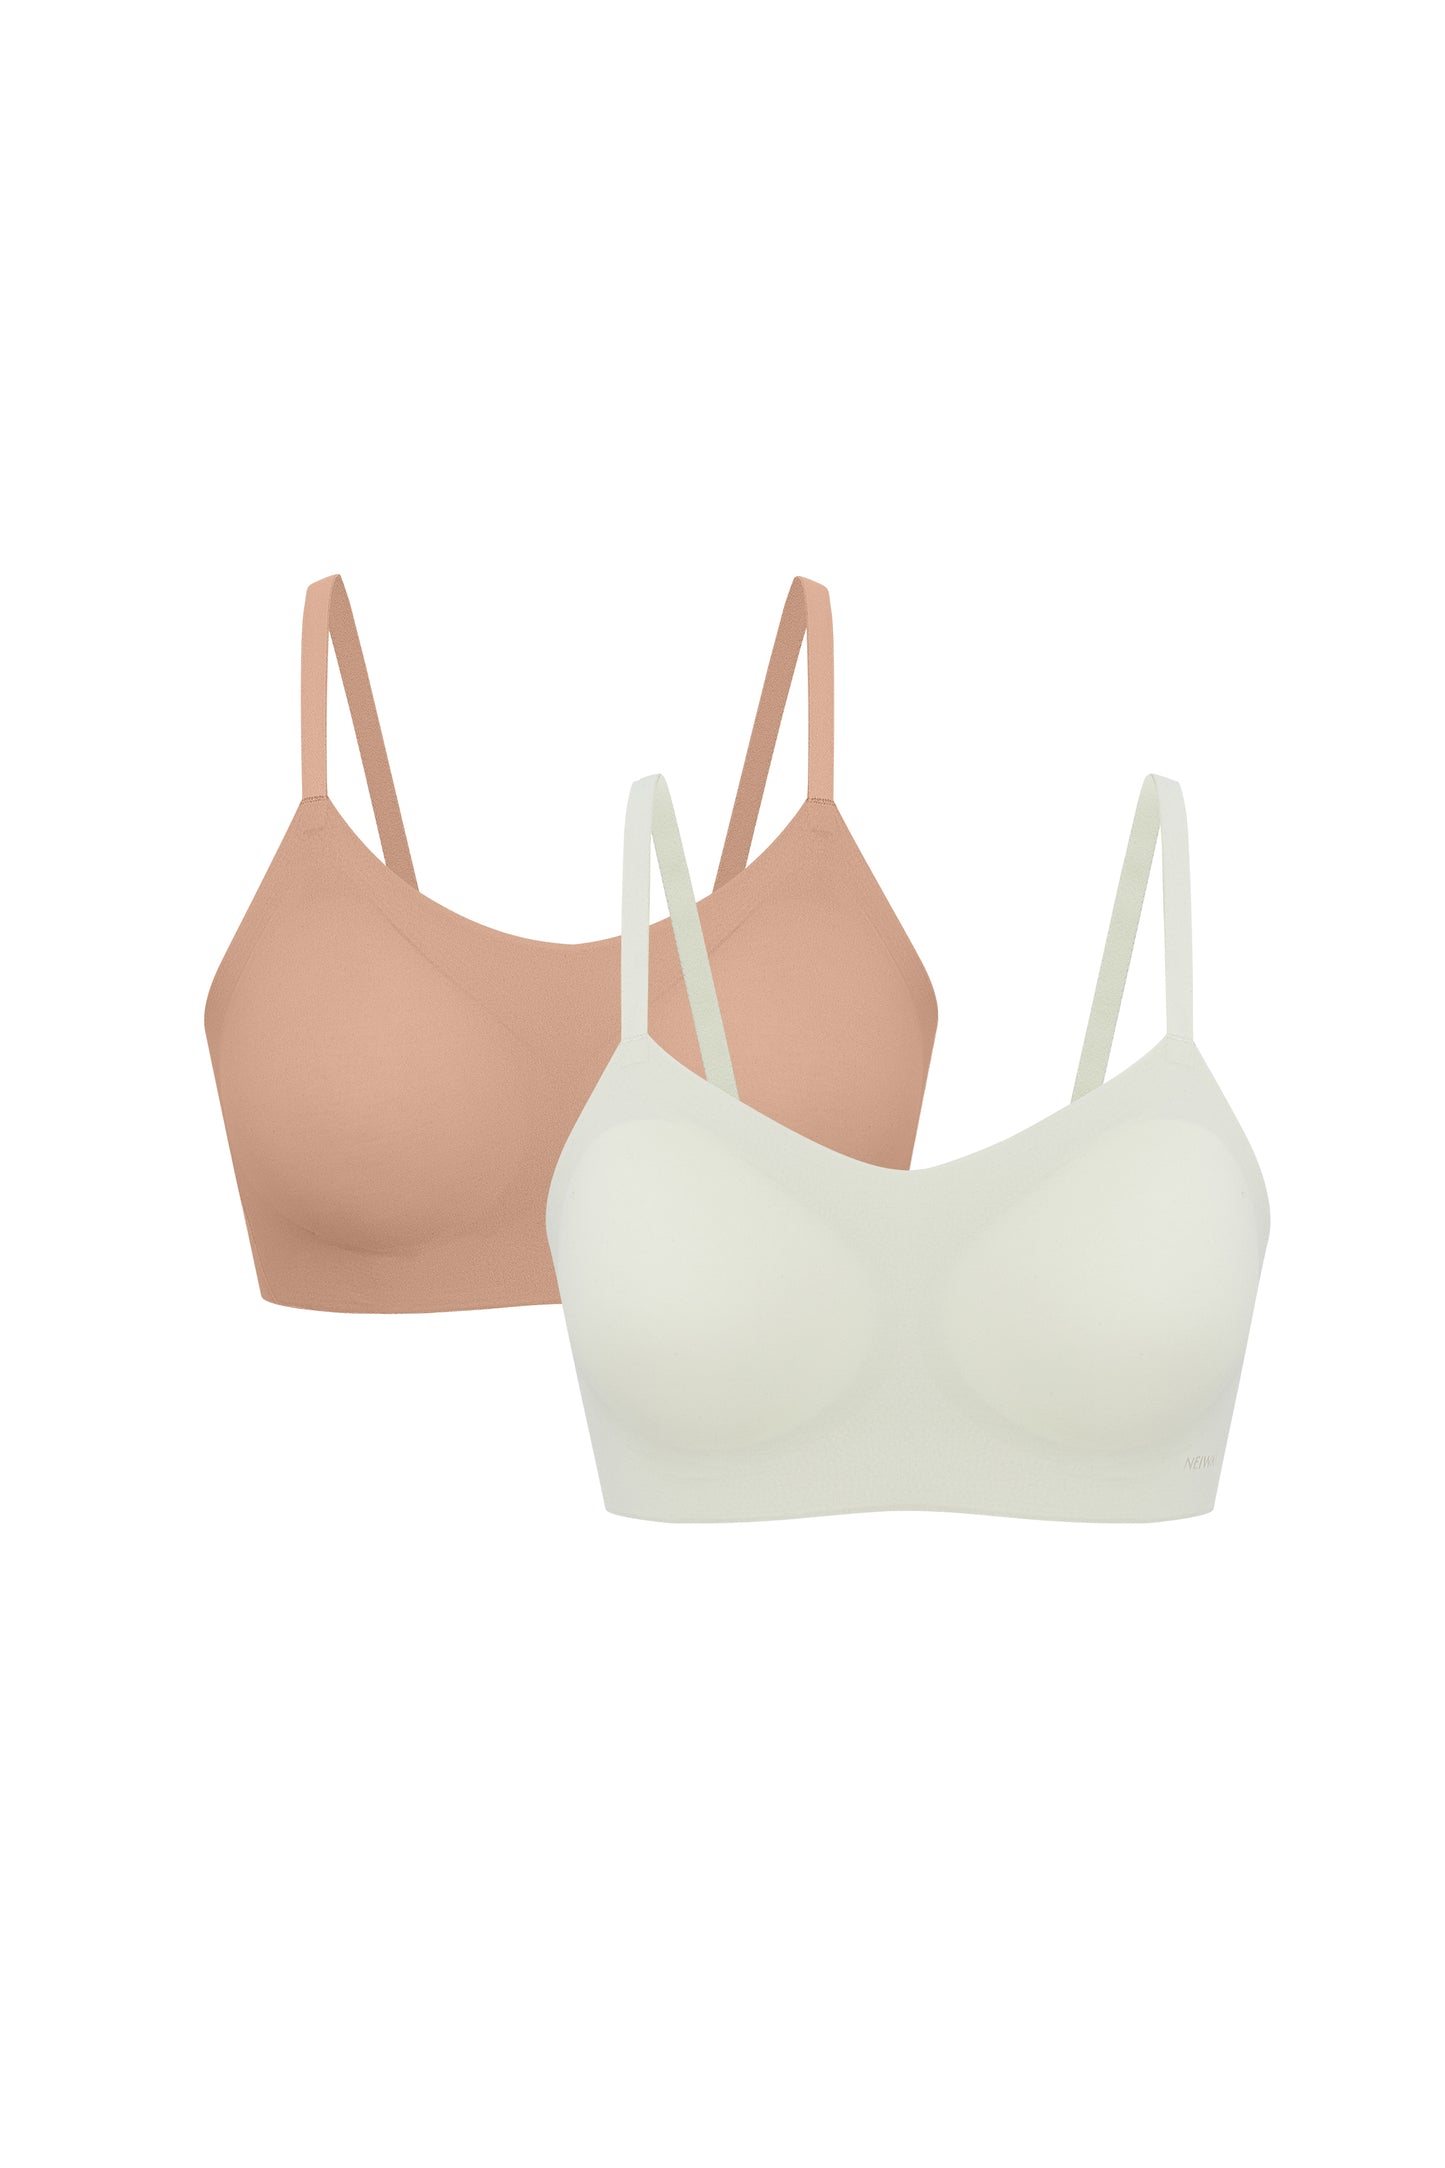 Flat lay image of off-white and tan spaghetti strap bras